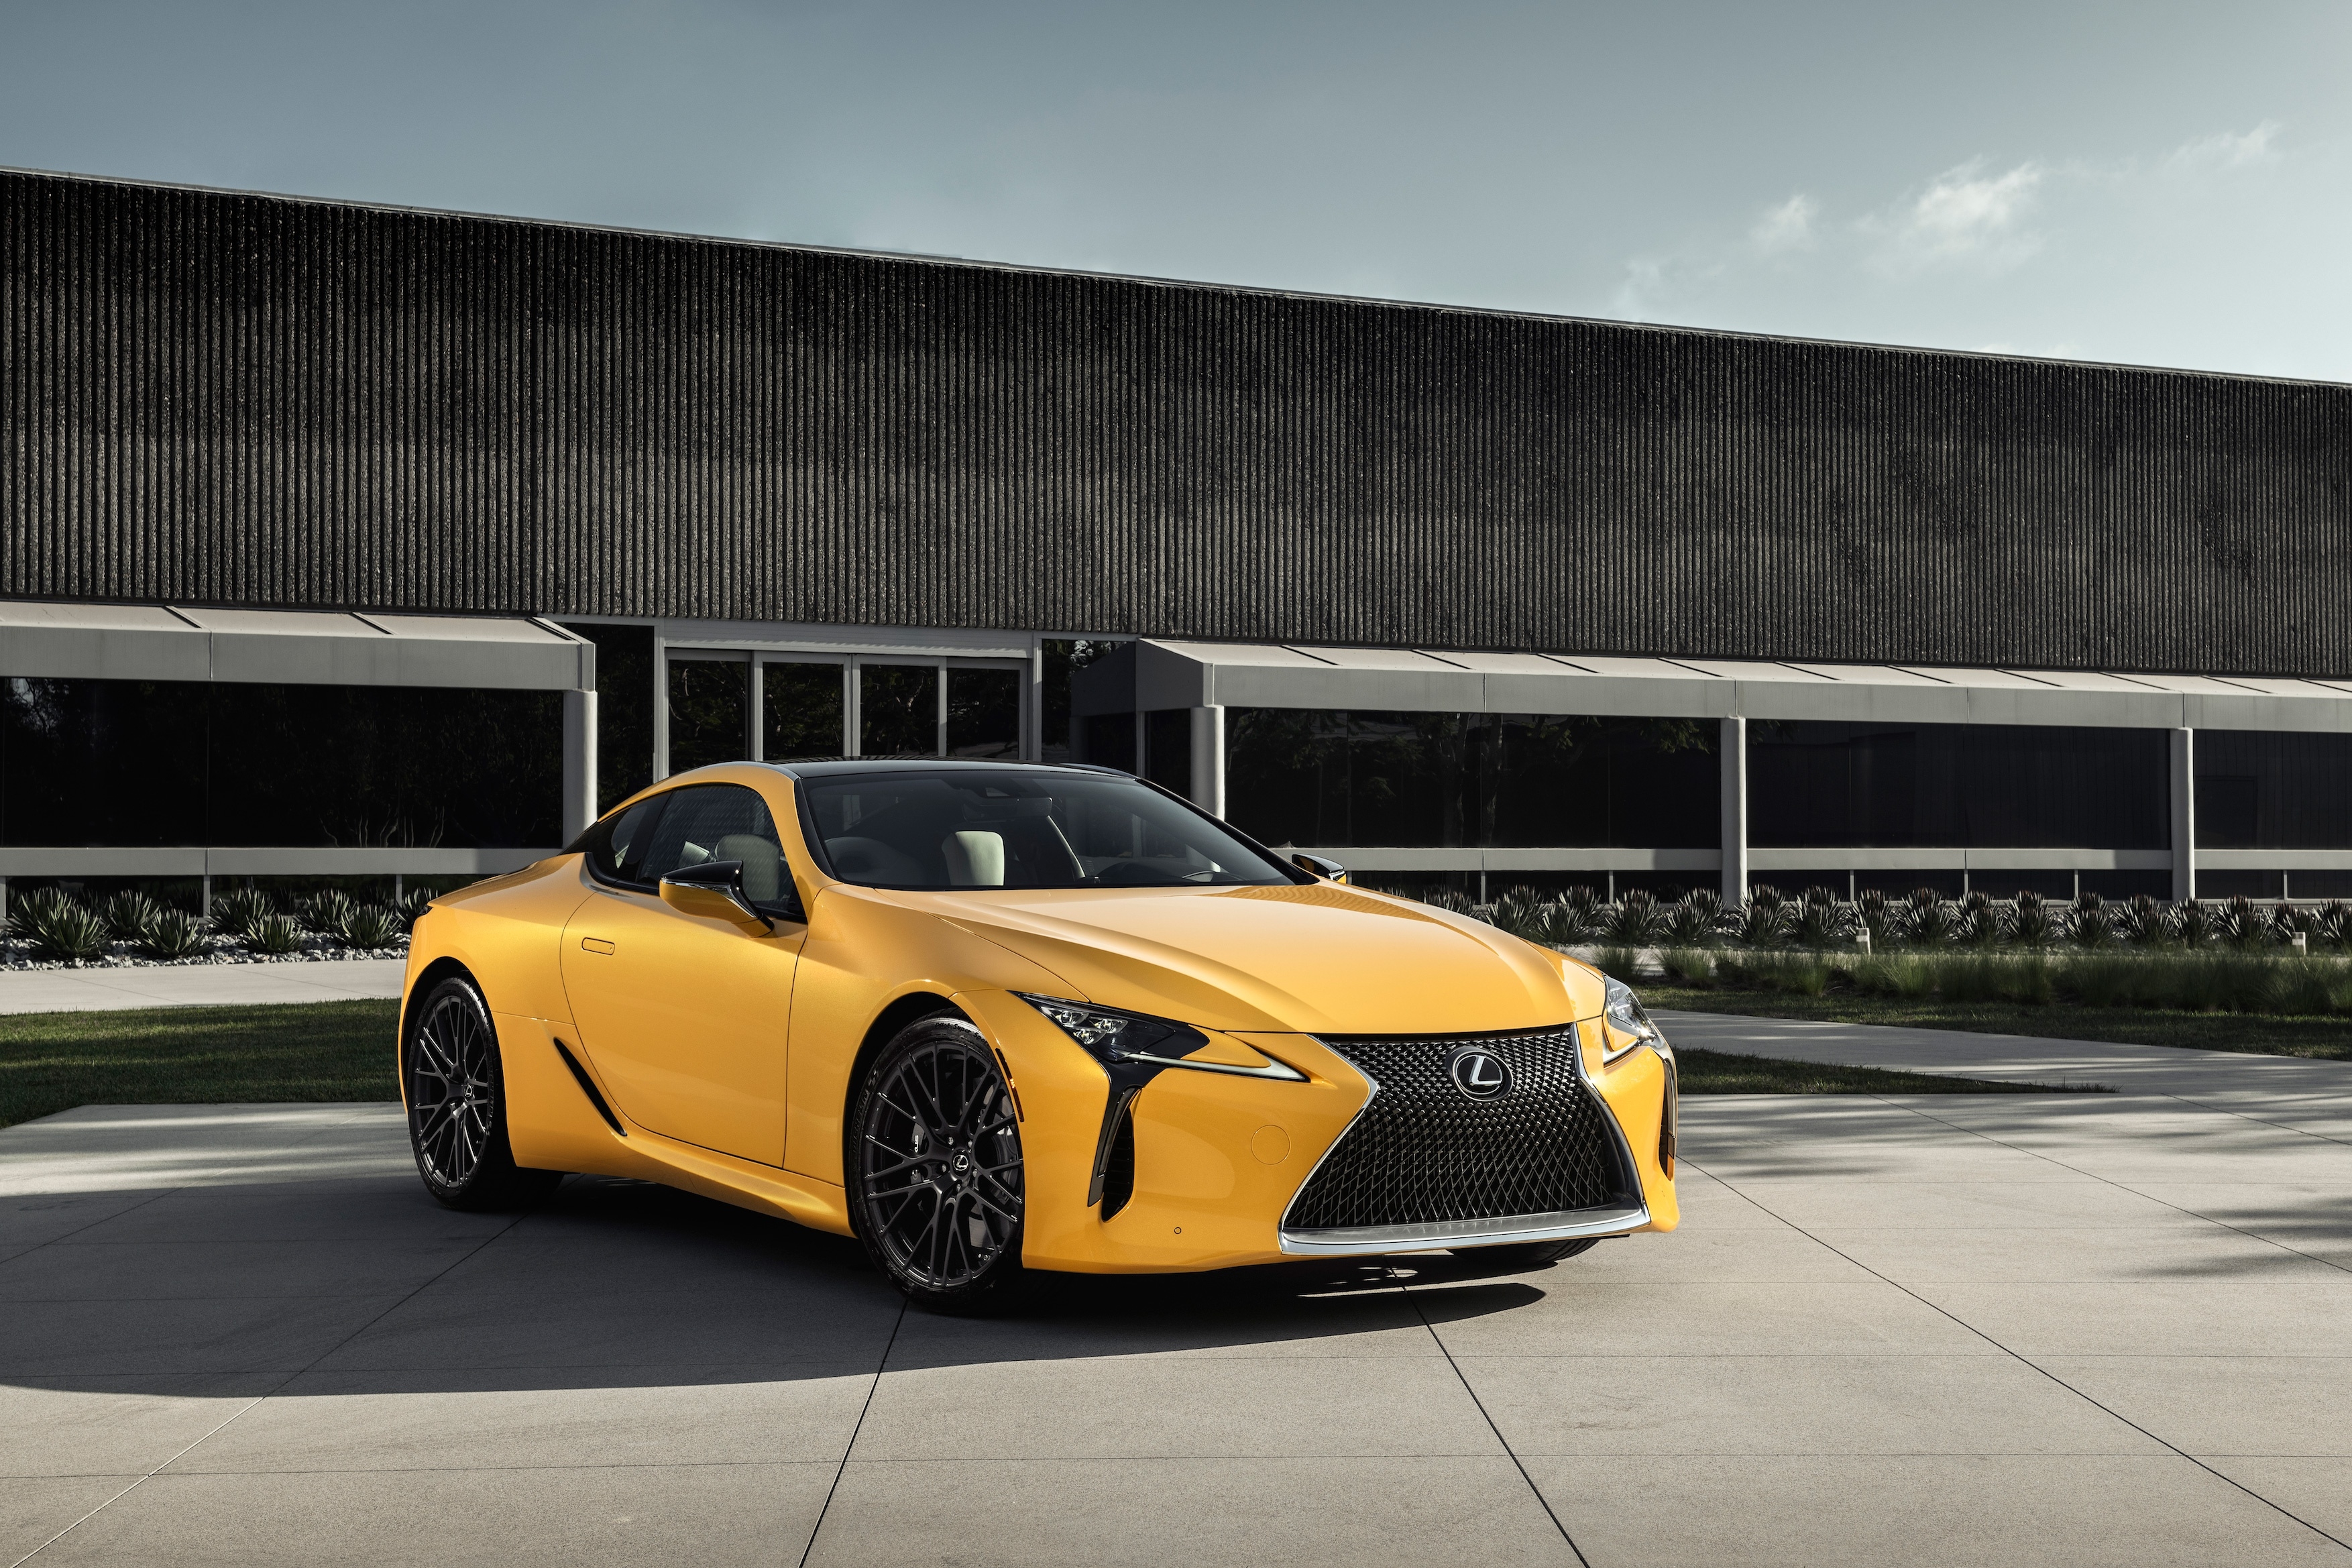 Wallpapers yellow supercars lexus lc 500 on the desktop